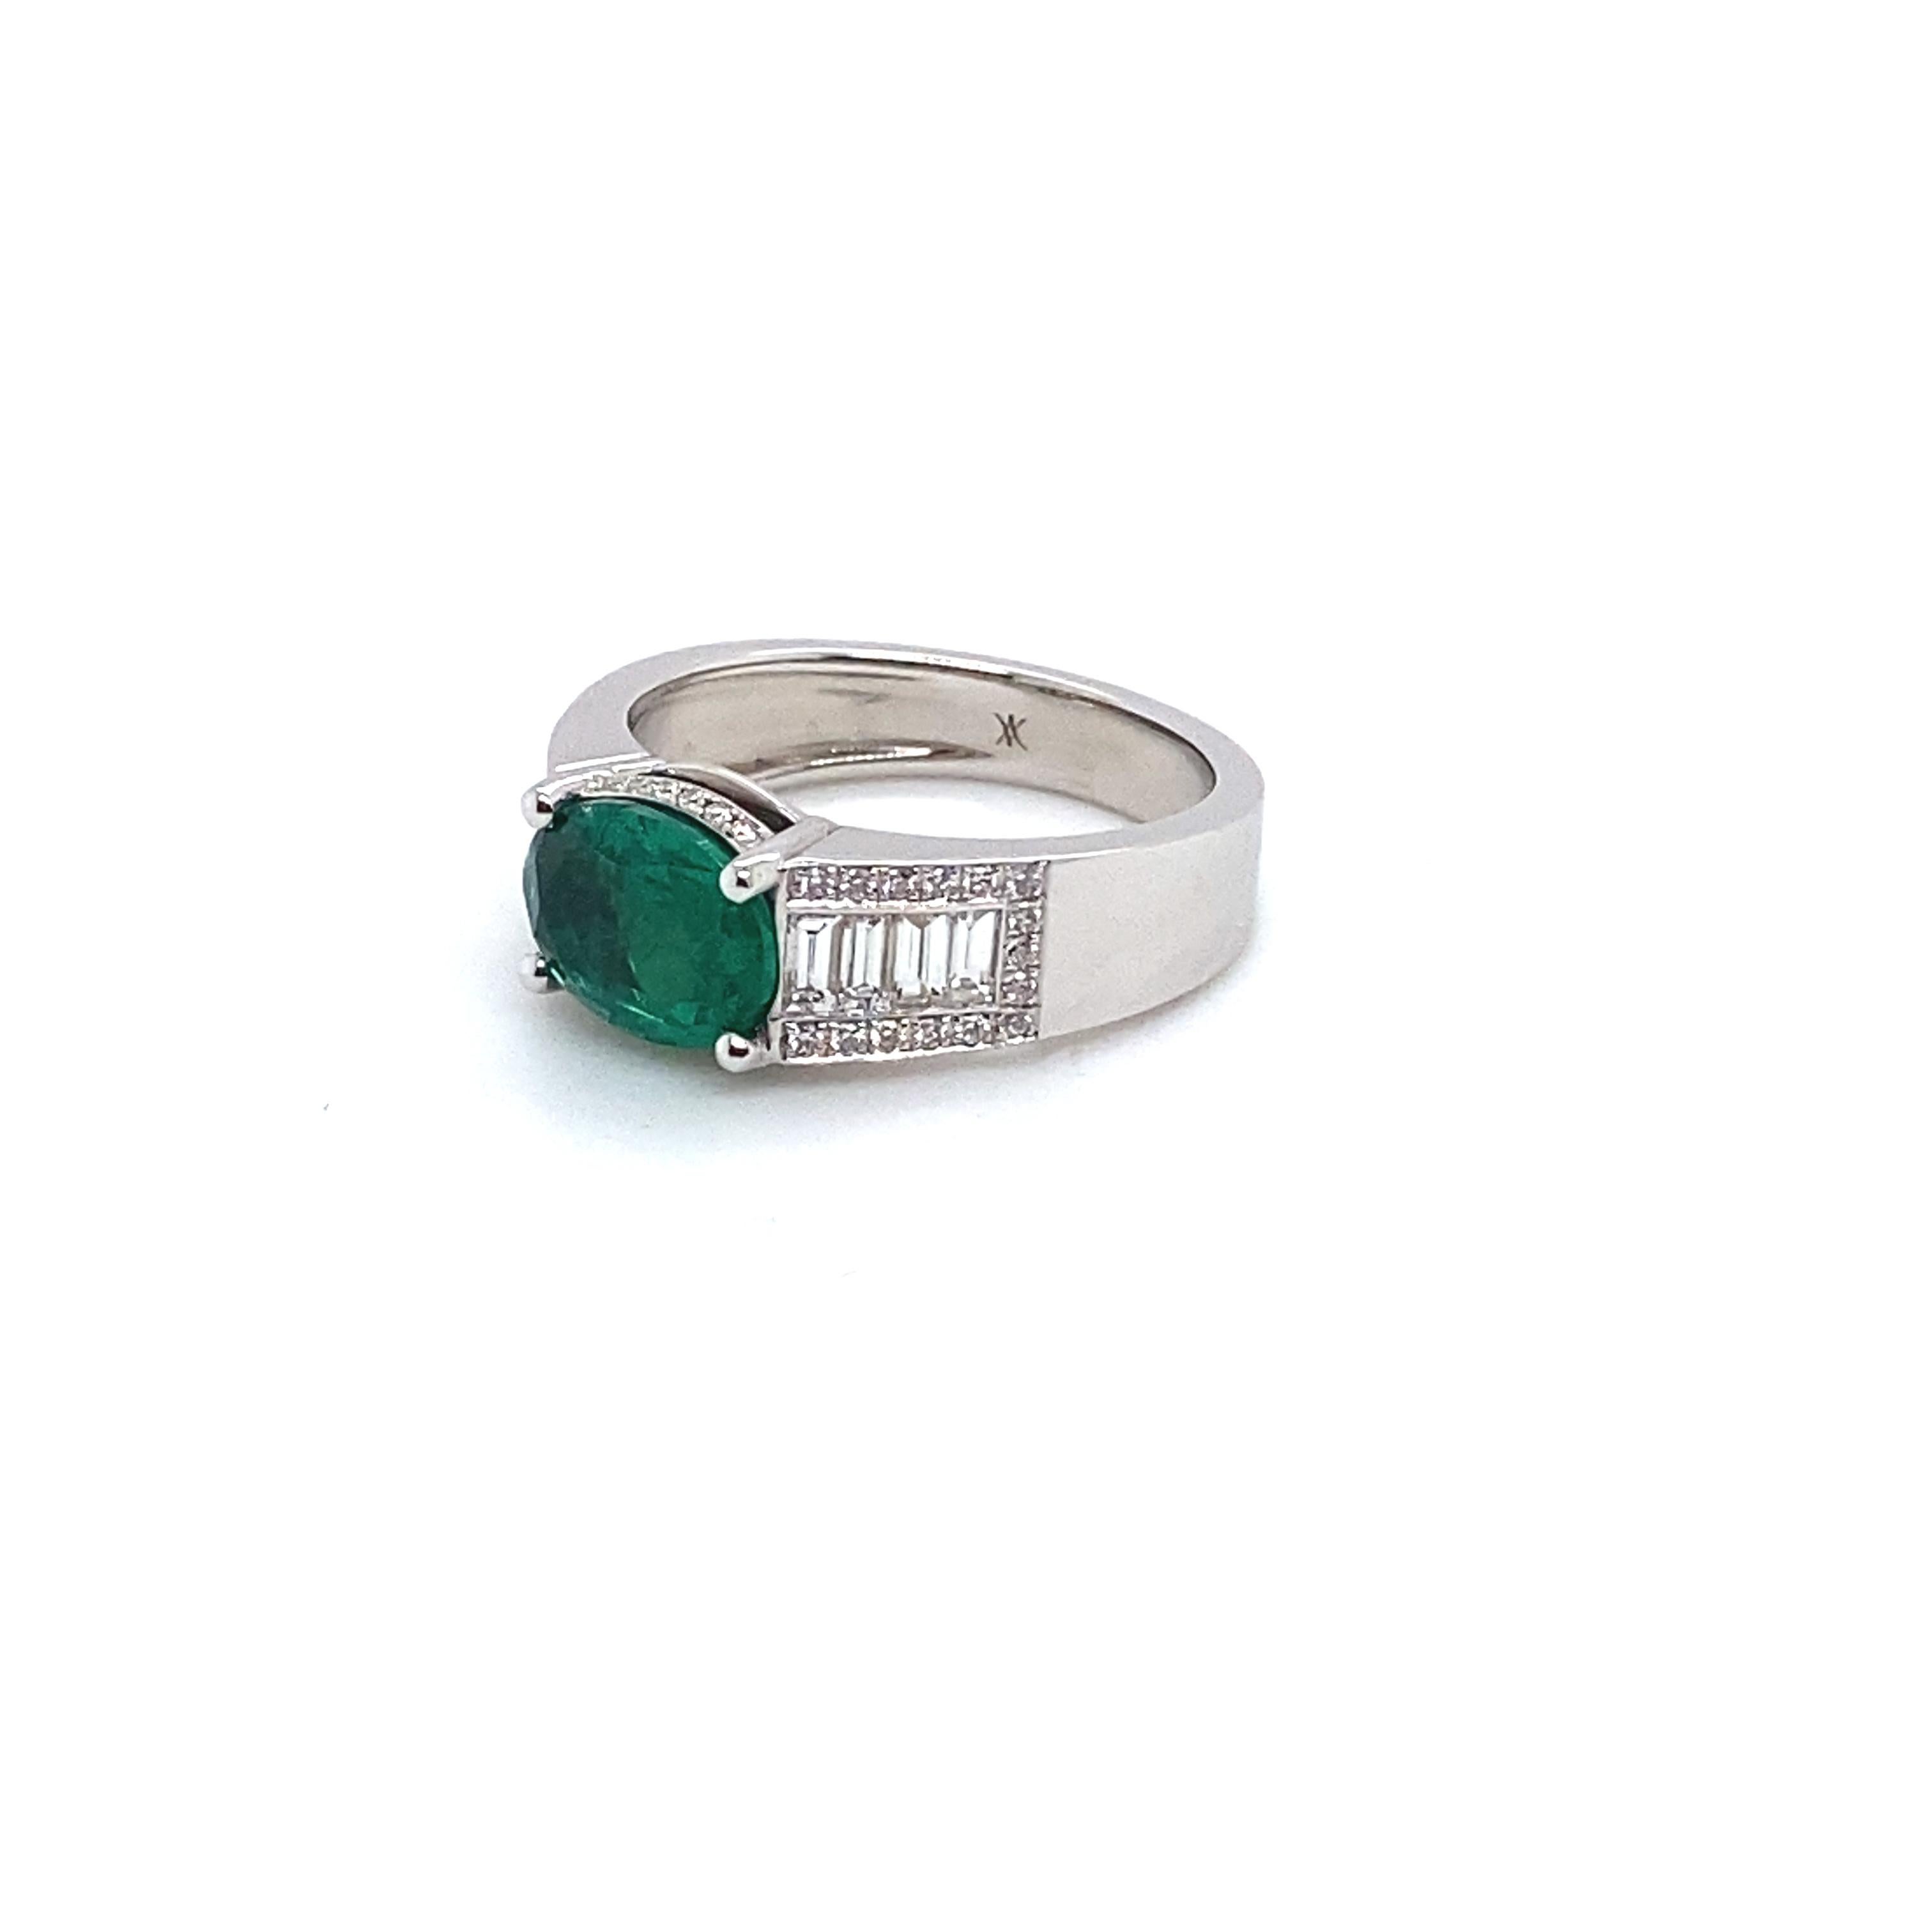 White Gold Ring Surmounted by an Natural Emerald with Diamonds.
White gold ring surmounted by an emerald with 42 brilliants diamonds, color F/G that weighs 0.40 carats and 8 baguettes diamonds, color F/G that weighs 0.15 carats.
Ring in the modern